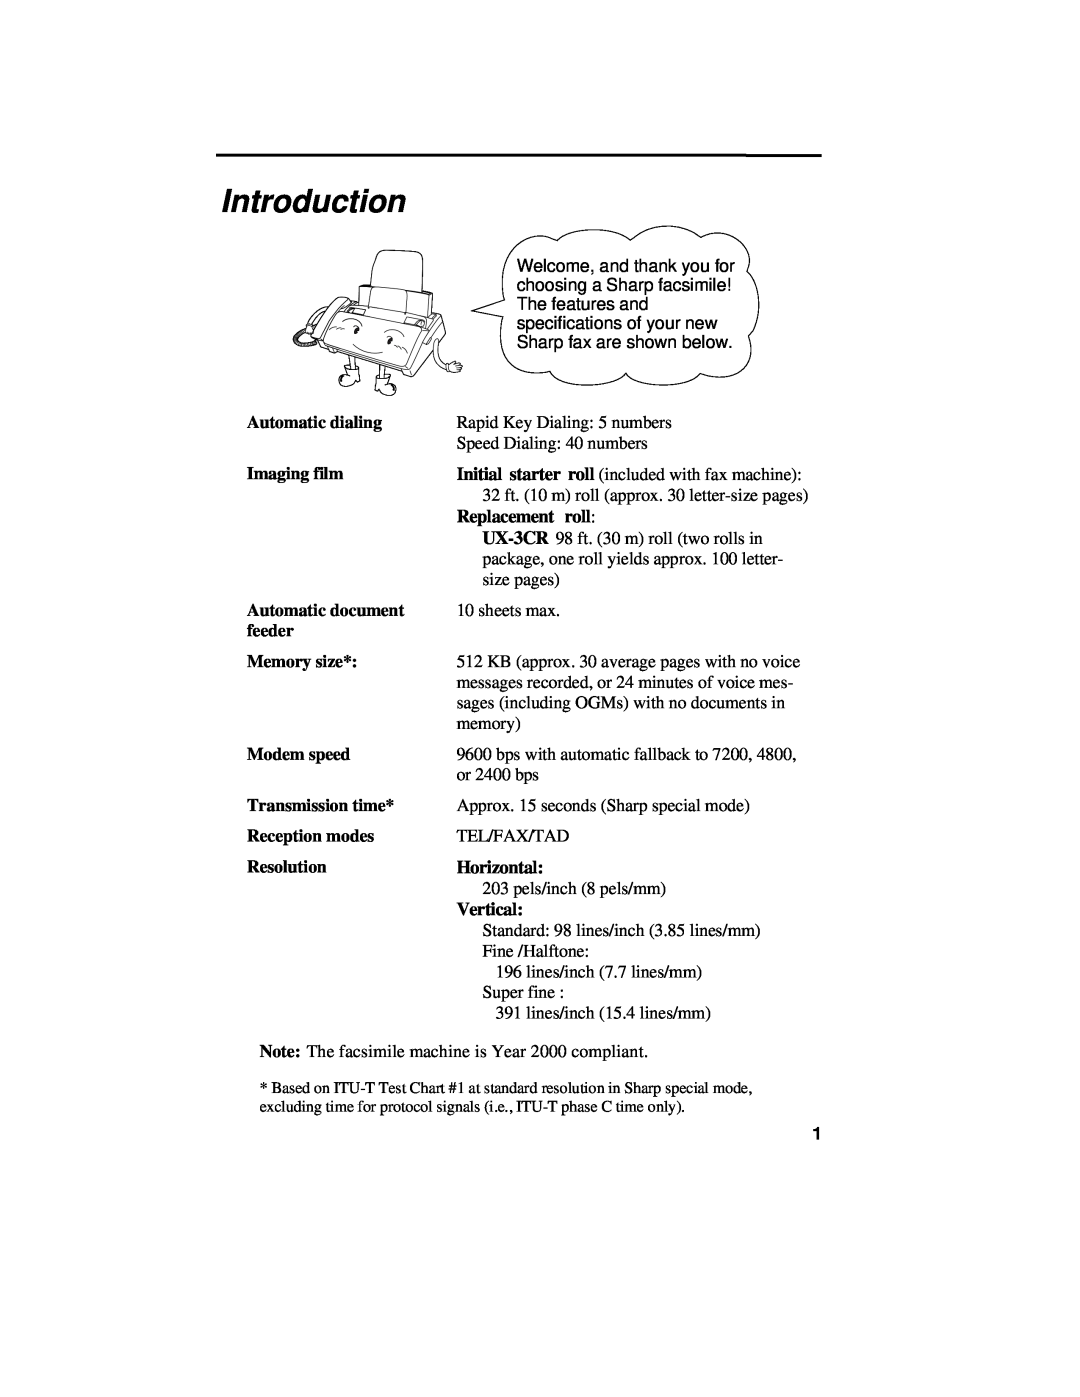 Sharp UX-460 operation manual Introduction, Replacement roll, Horizontal, Vertical 